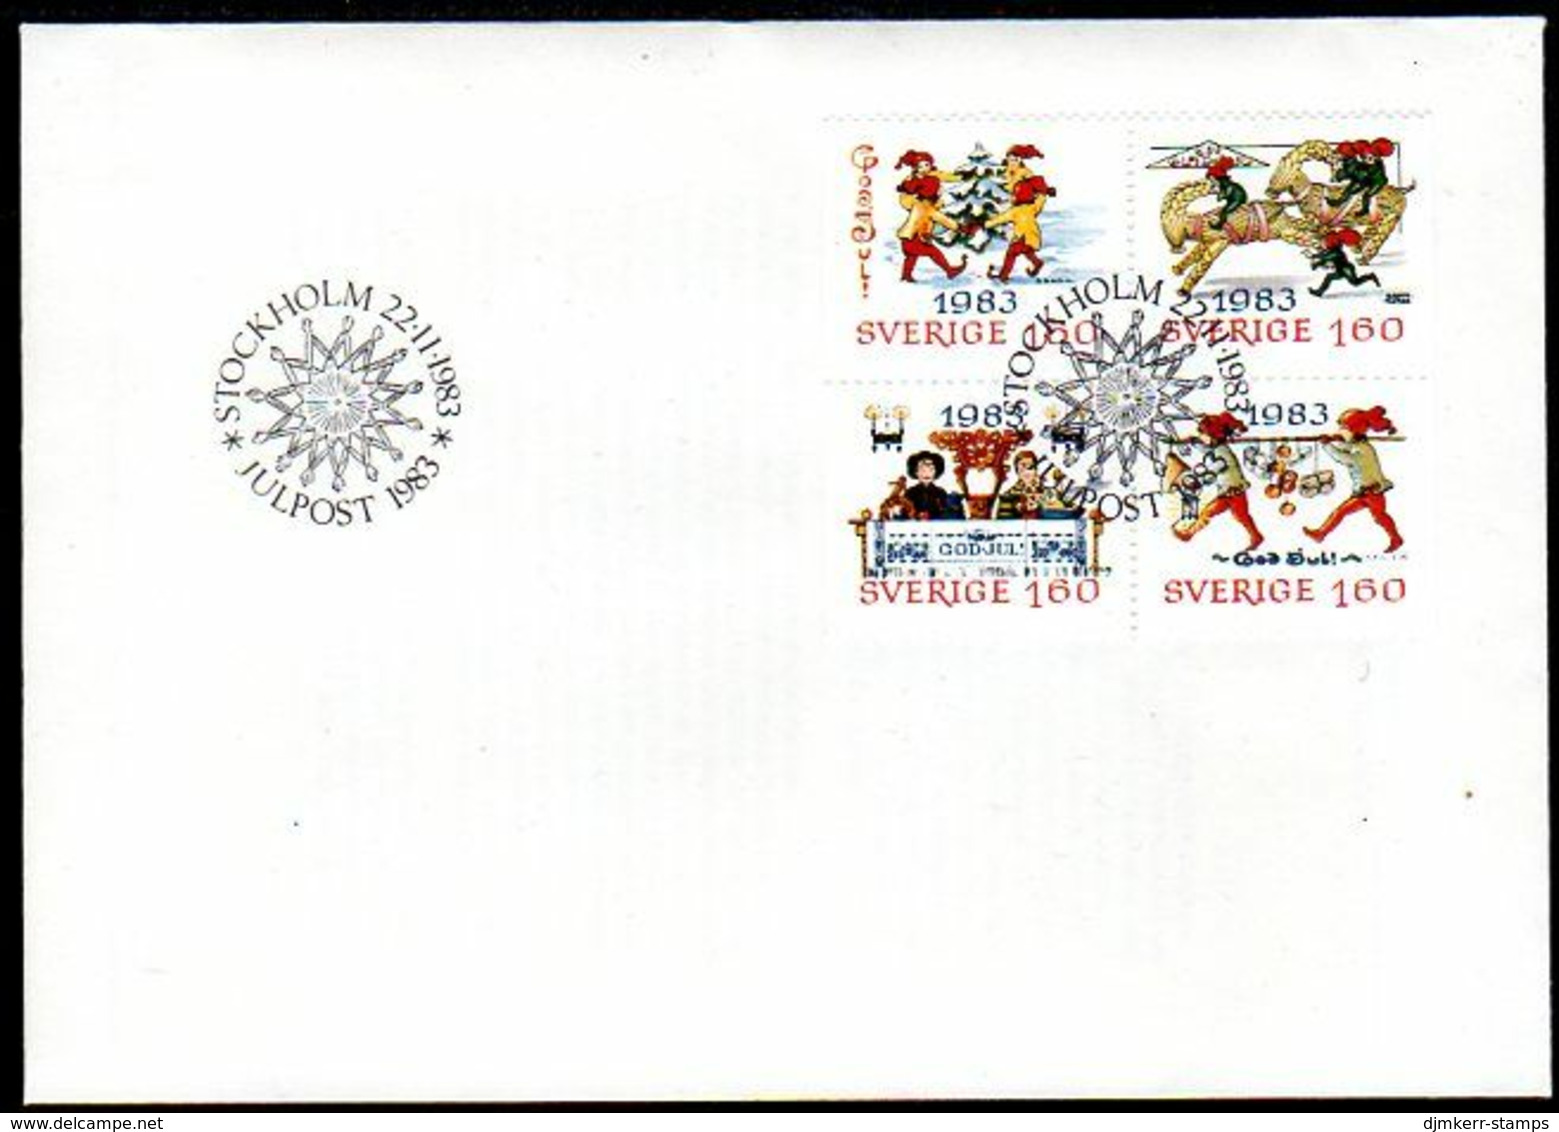 SWEDEN 1983 Christmas FDC. Michel 1258-61 - FDC